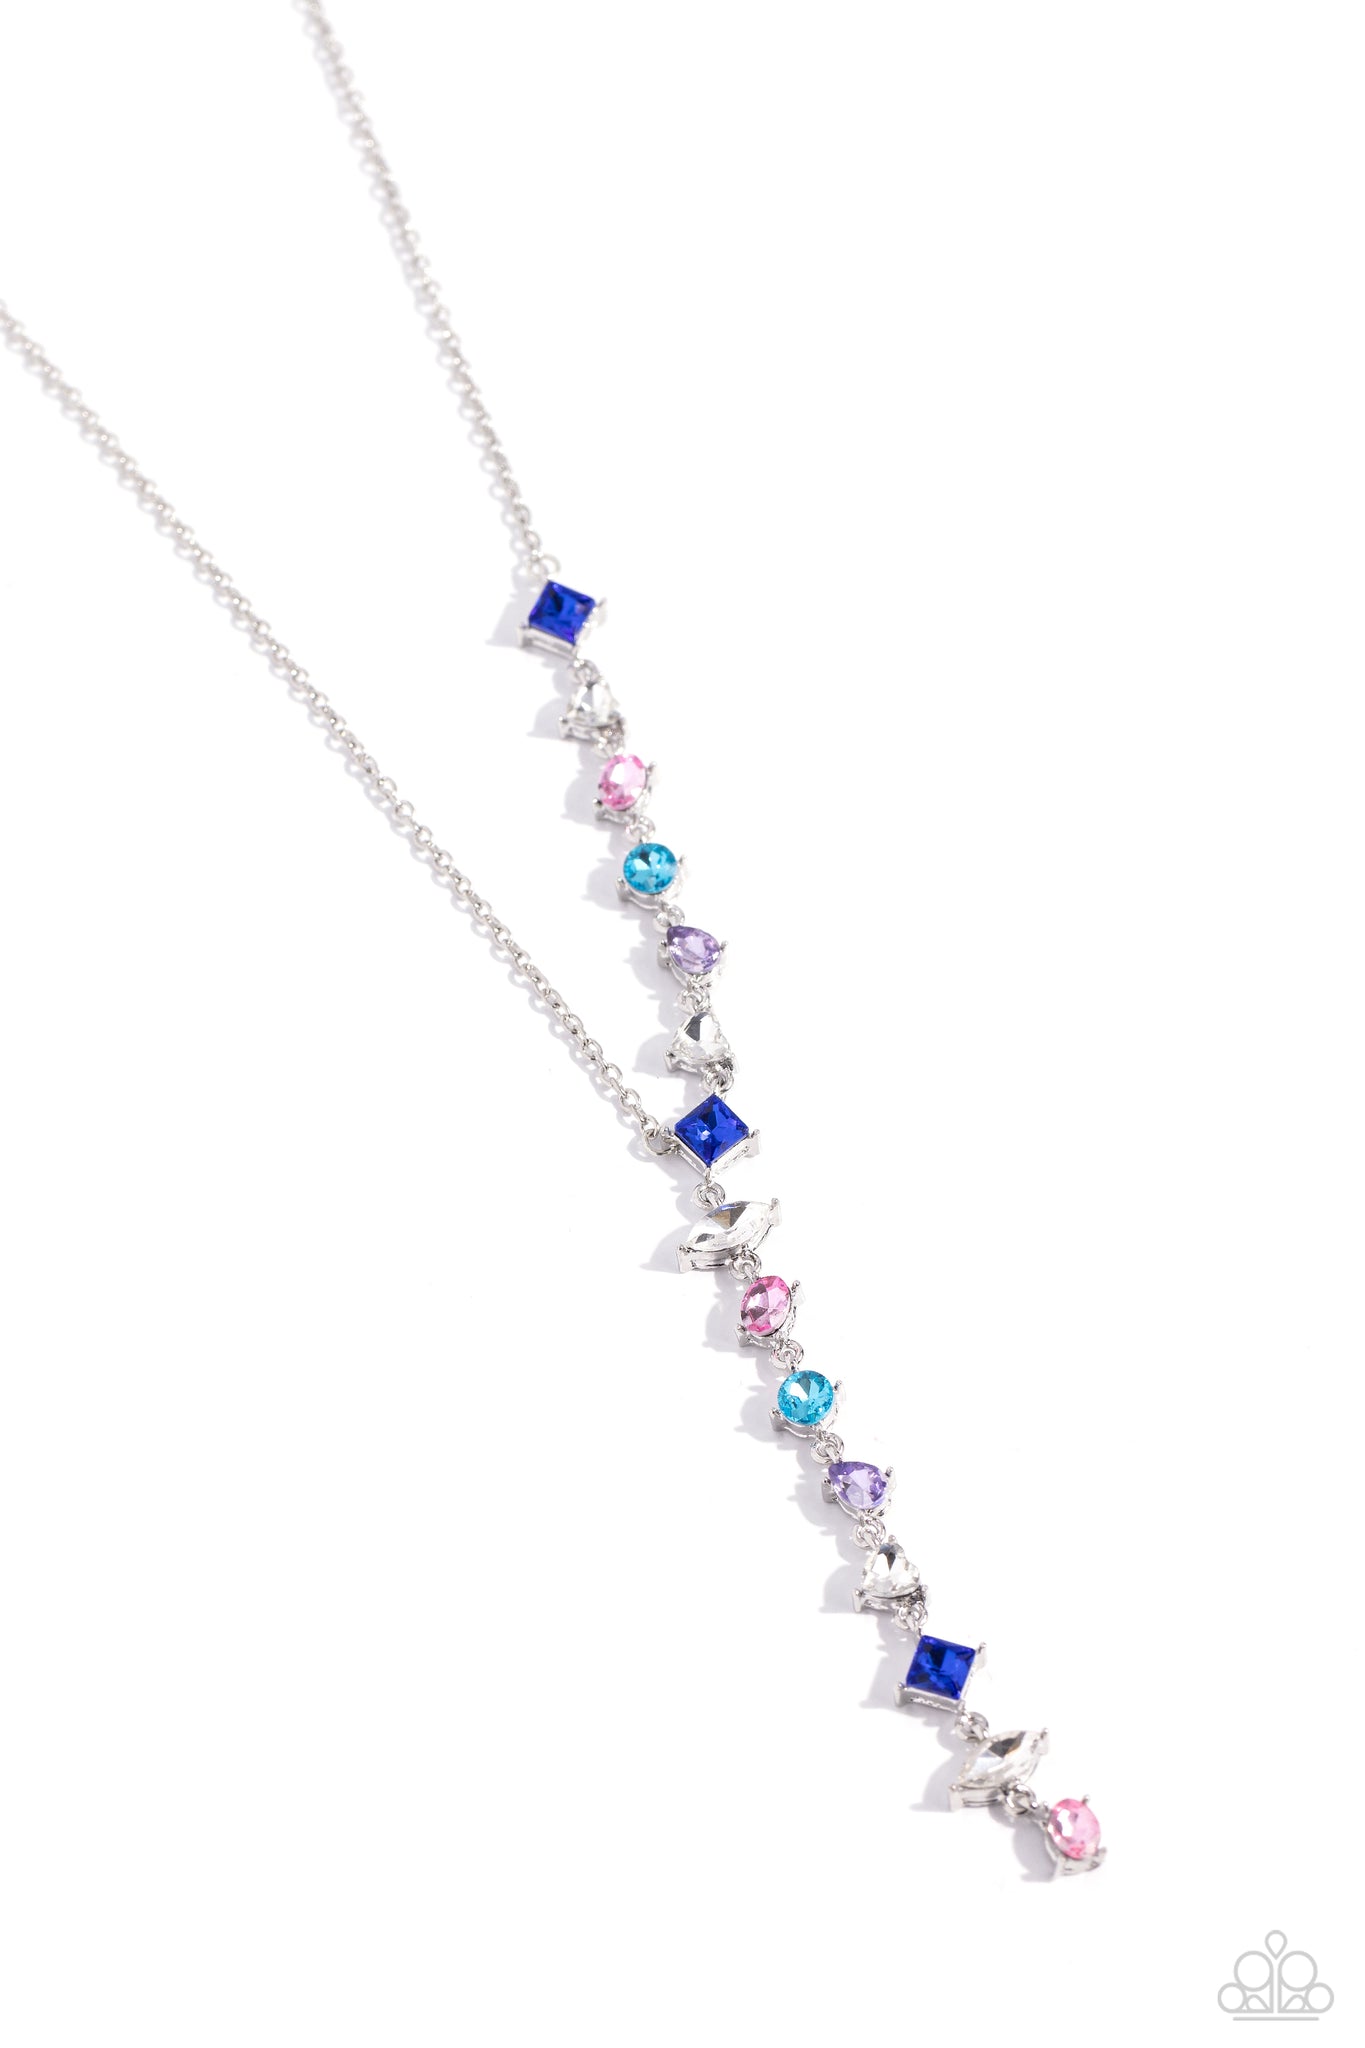 Diagonal Daydream Necklace (Multi, Pink, Blue)